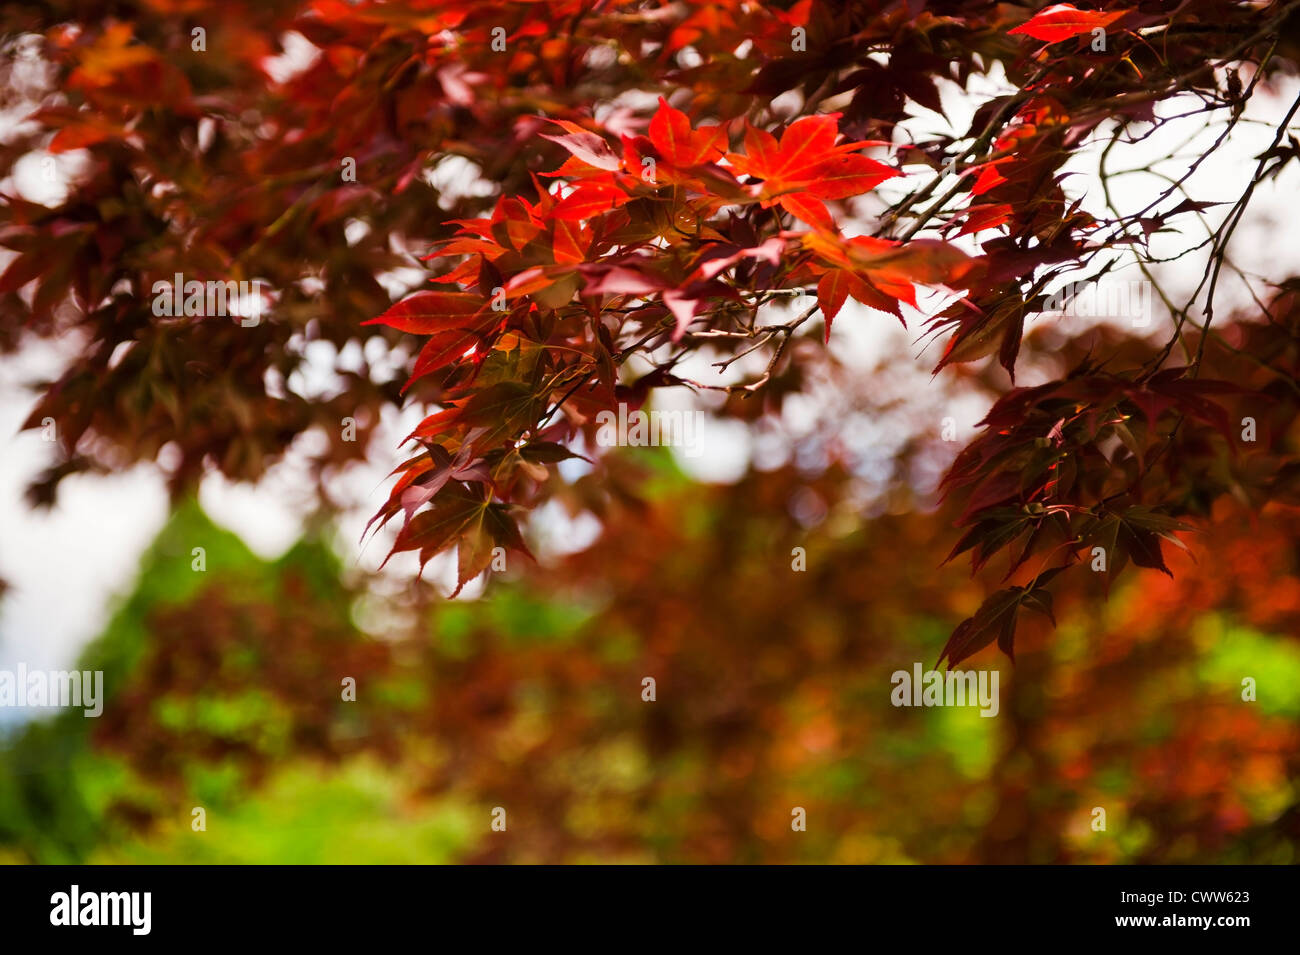 Japanese maple (acer japonica) fall background with shallow depth of field Stock Photo